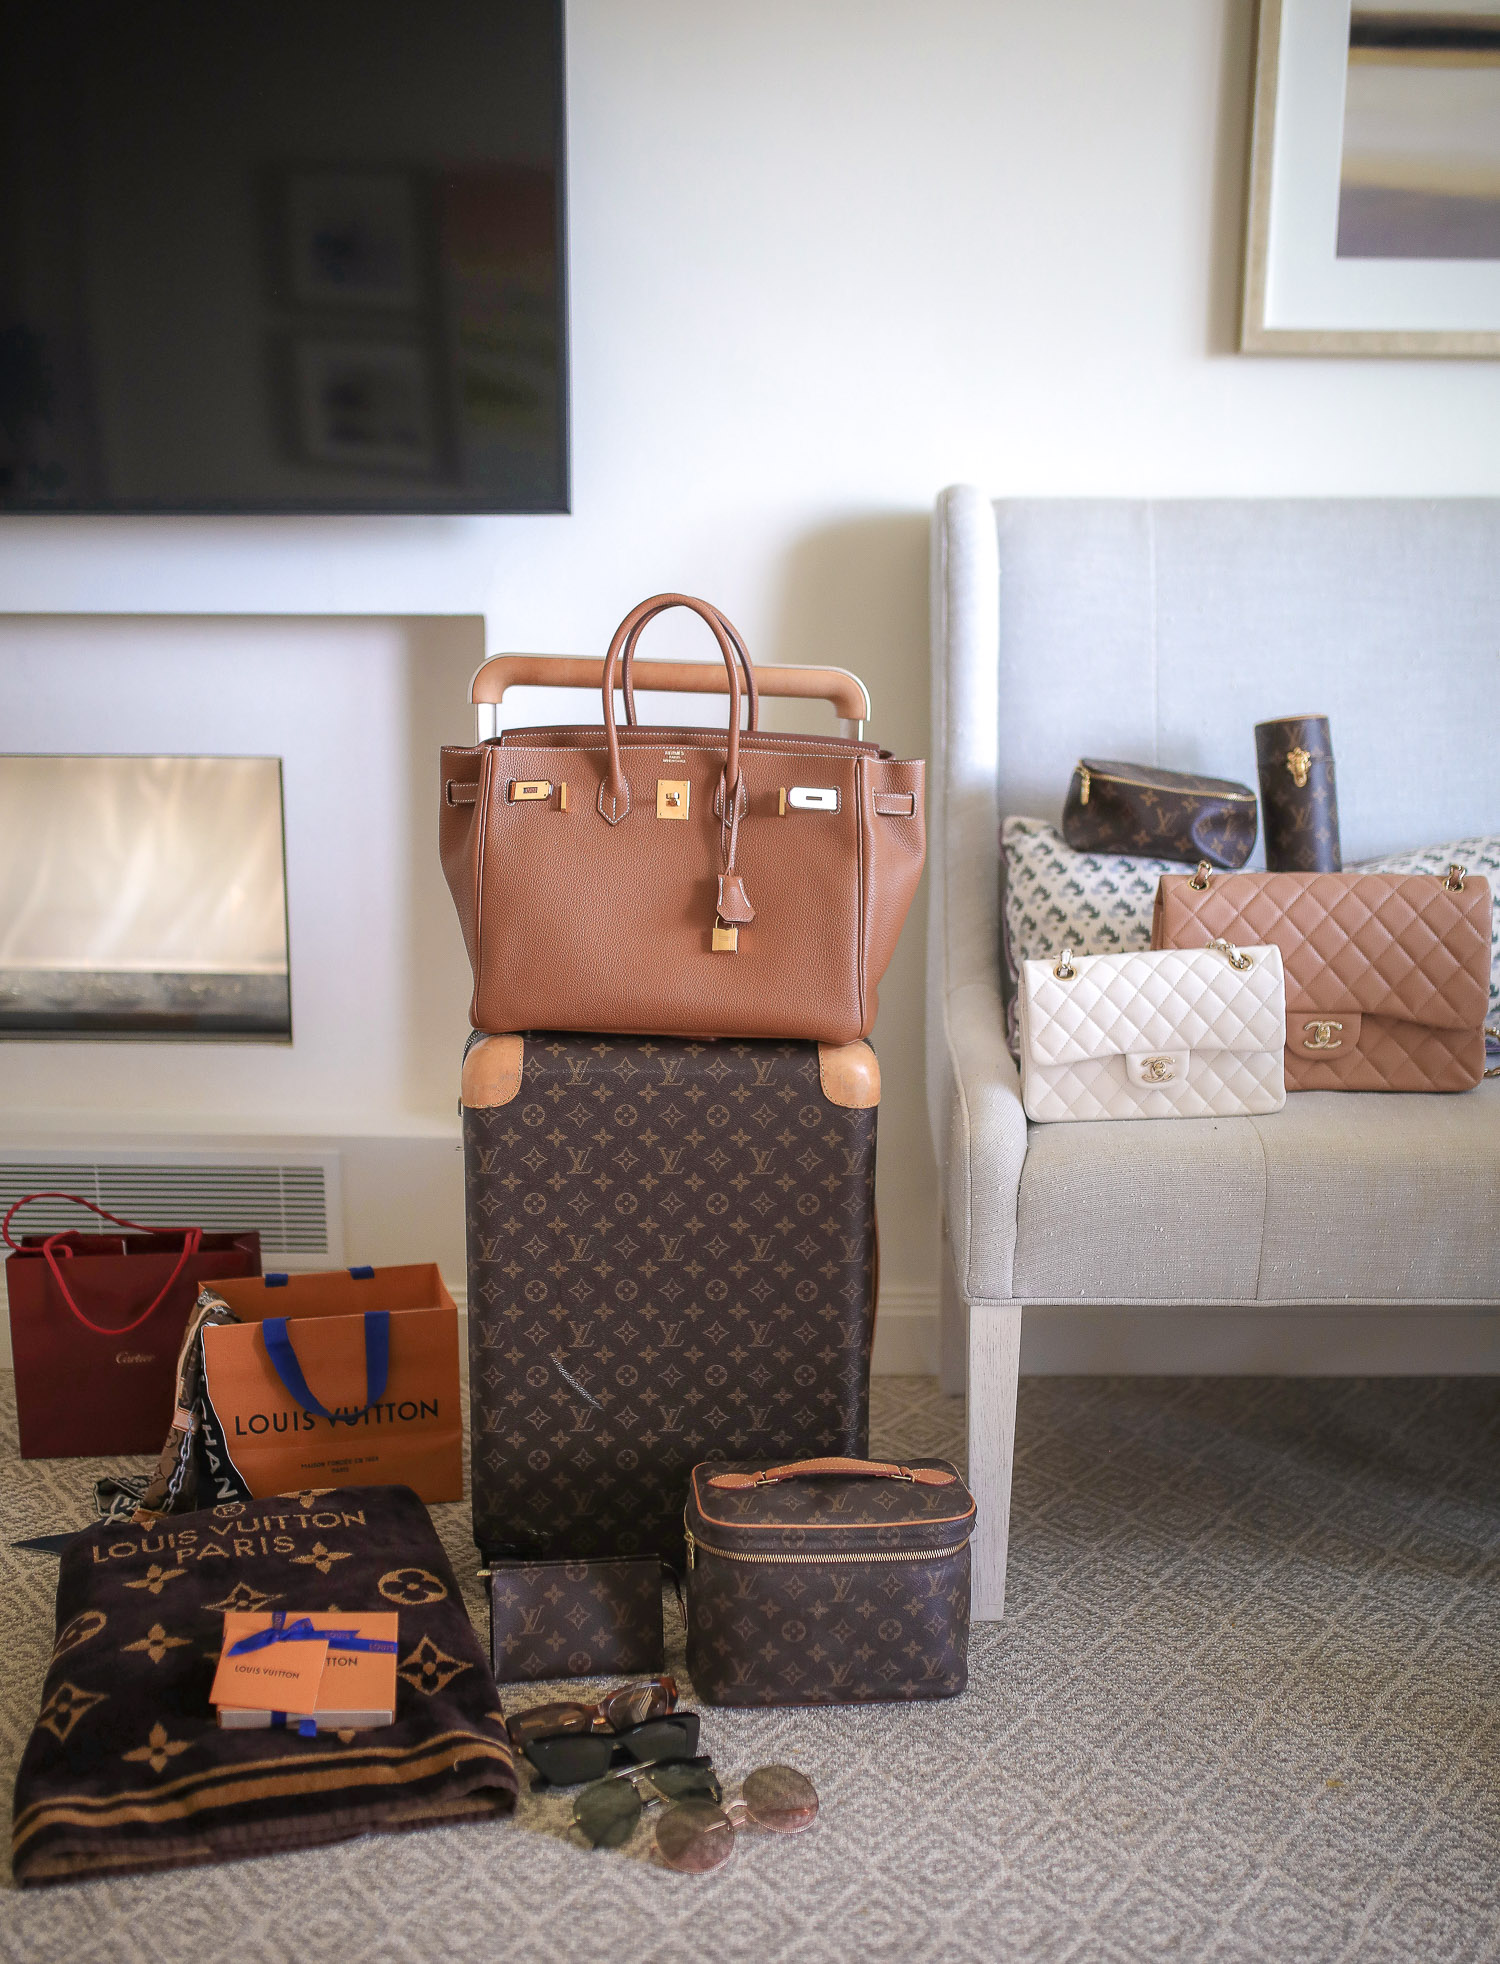 Louis Vuitton Horizon 55 carry on, Hermes berkin 35 tan gold hardware, Louis Vuitton beach towel, Emily Gemma | Travel Hacks by popular life and style blog, The Sweetest Thing: image of Louis Vuitton luggage, Louis Vuitton blanket, Louis Vuitton makeup bag, Chanel purses, and designer sunglasses. 